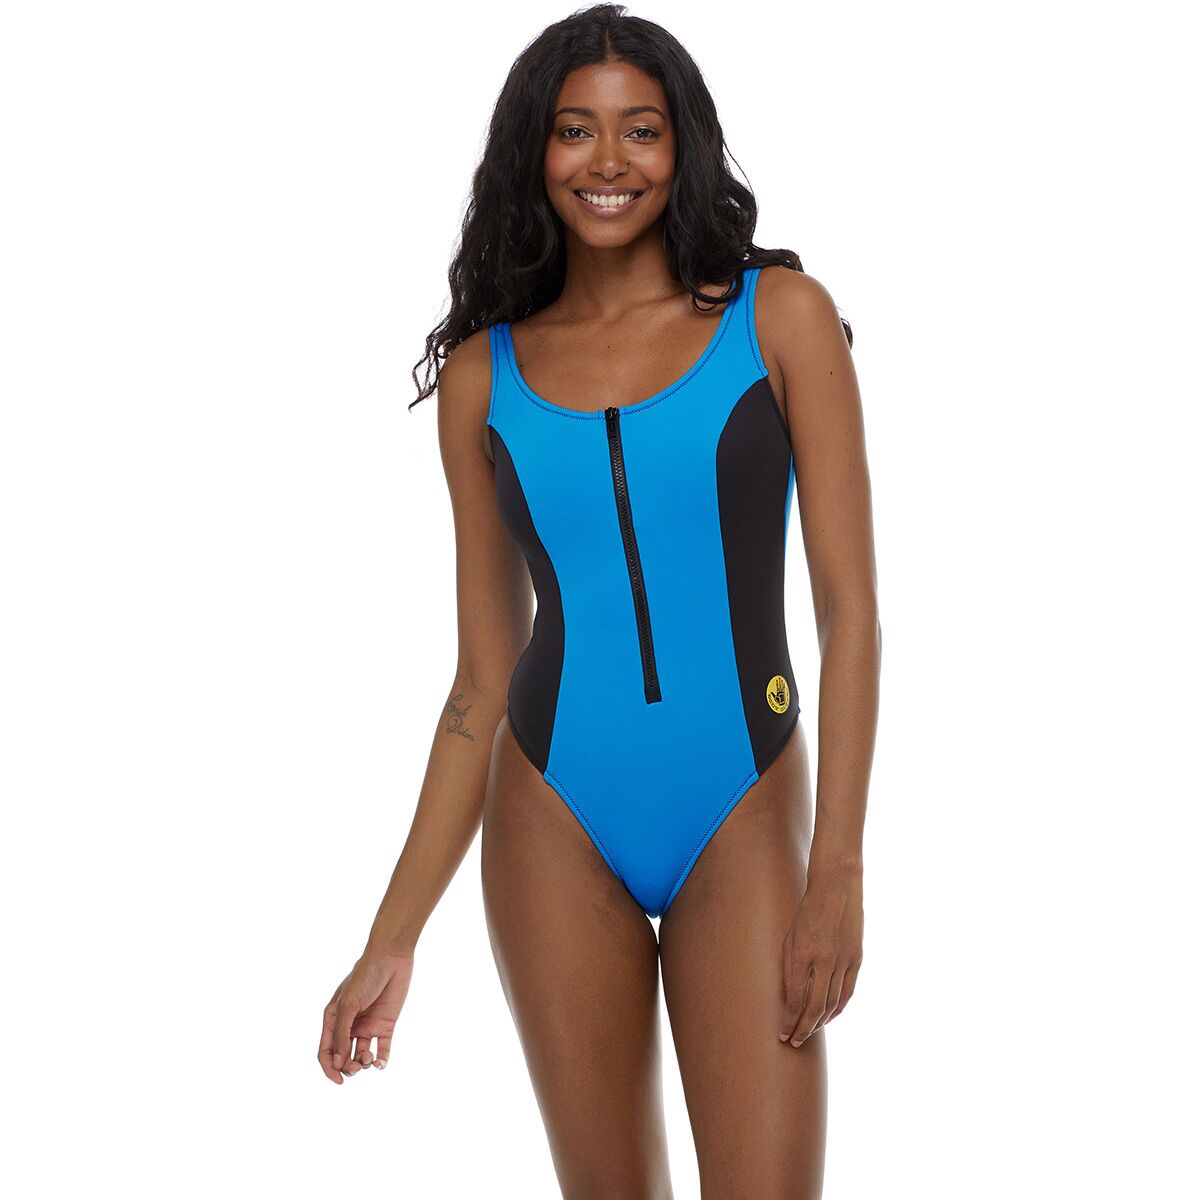 Body Glove 80s Throwback One-Piece Time After Time Swim Suit - Women's